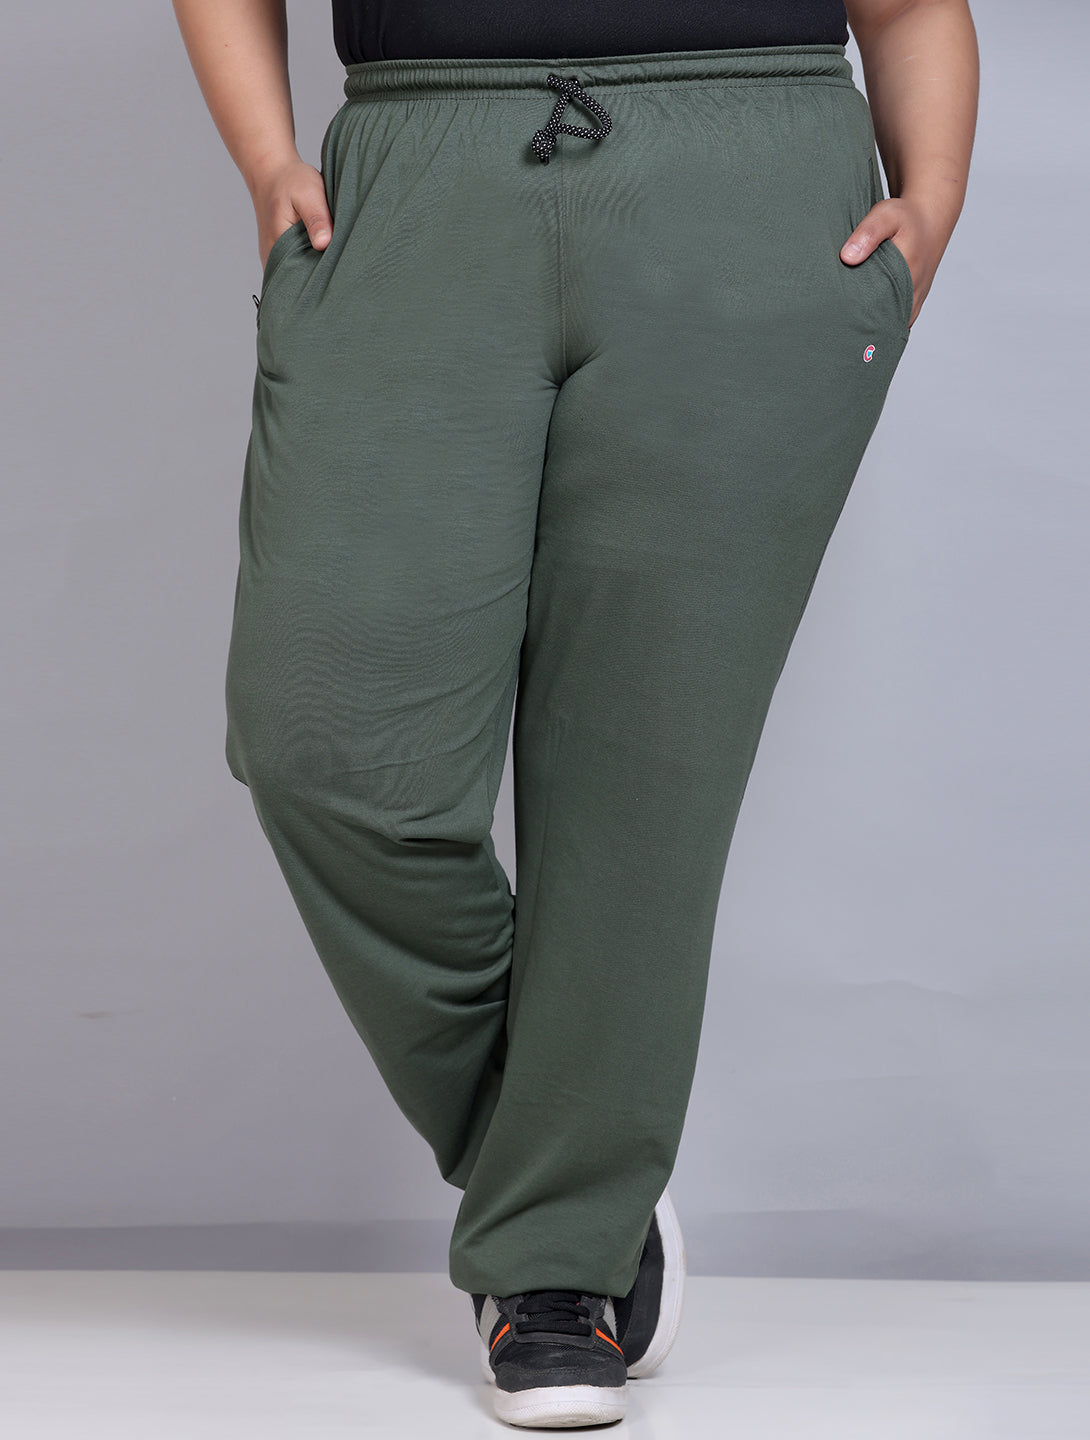 Stylish Green Cotton Lowers Track Pants For Women Online In India